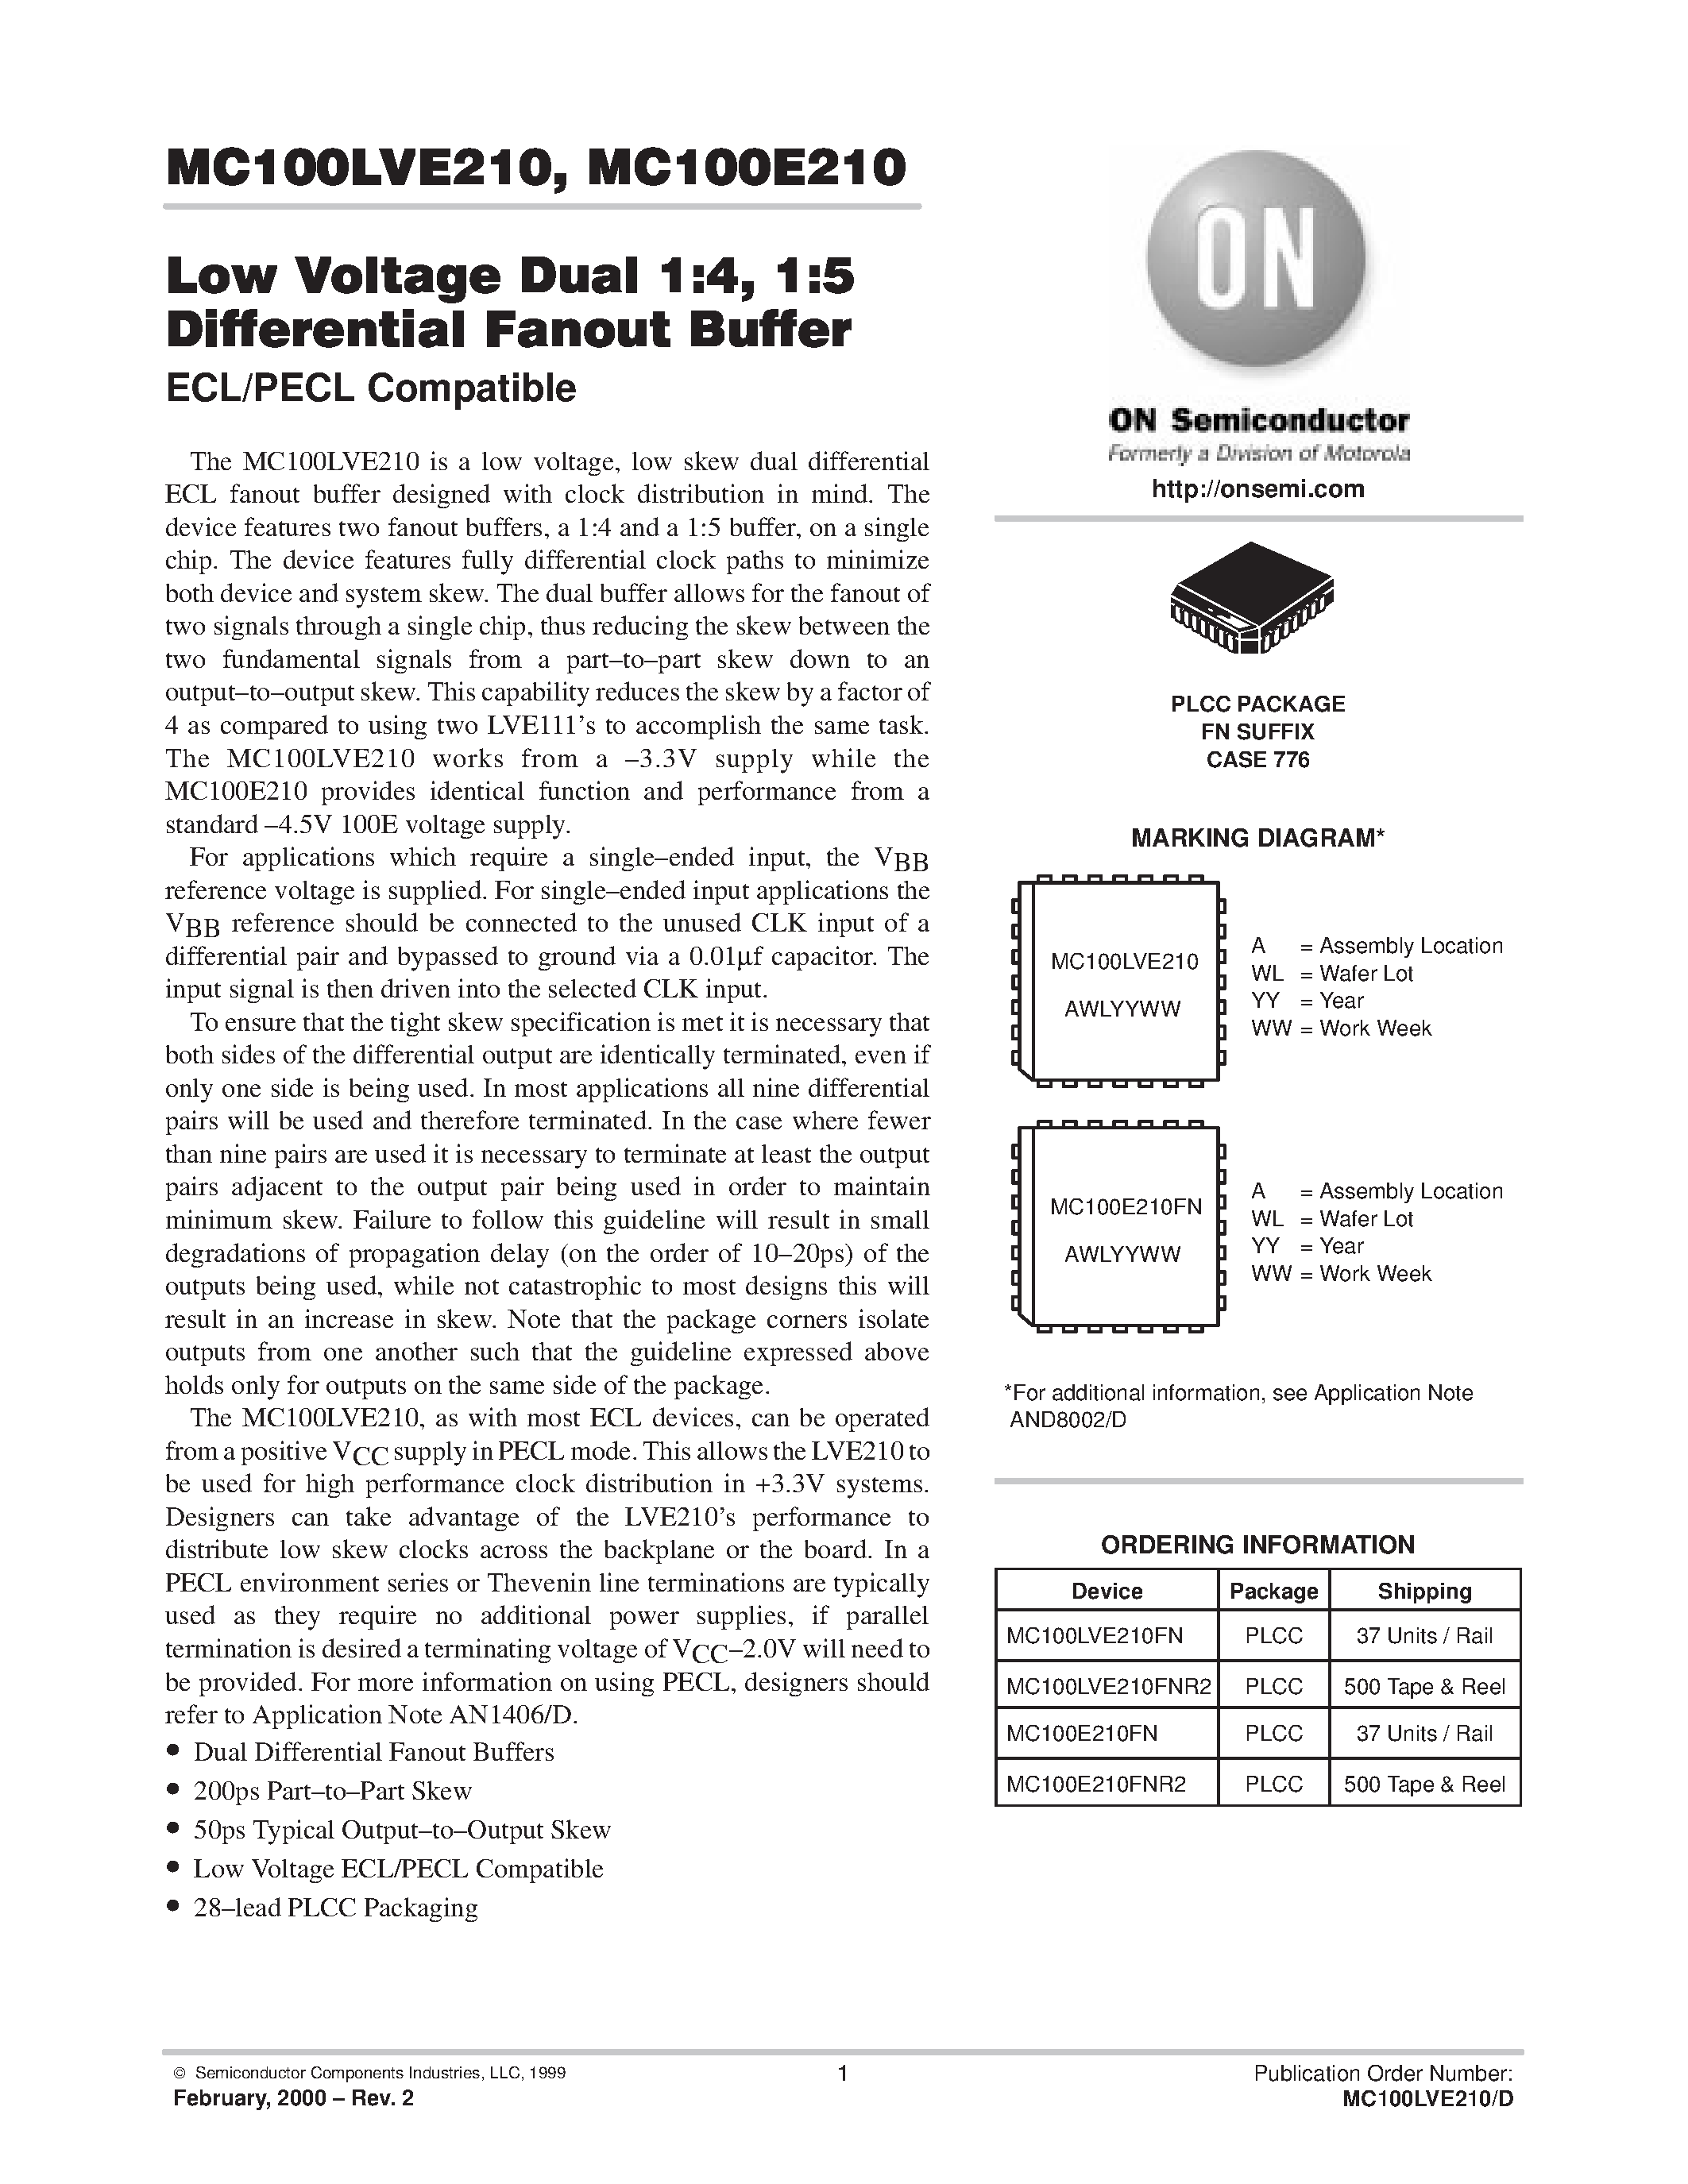 Datasheet MC100E210FN - Low Voltage Dual 1:4 / 1:5 Differential Fanout Buffer page 1